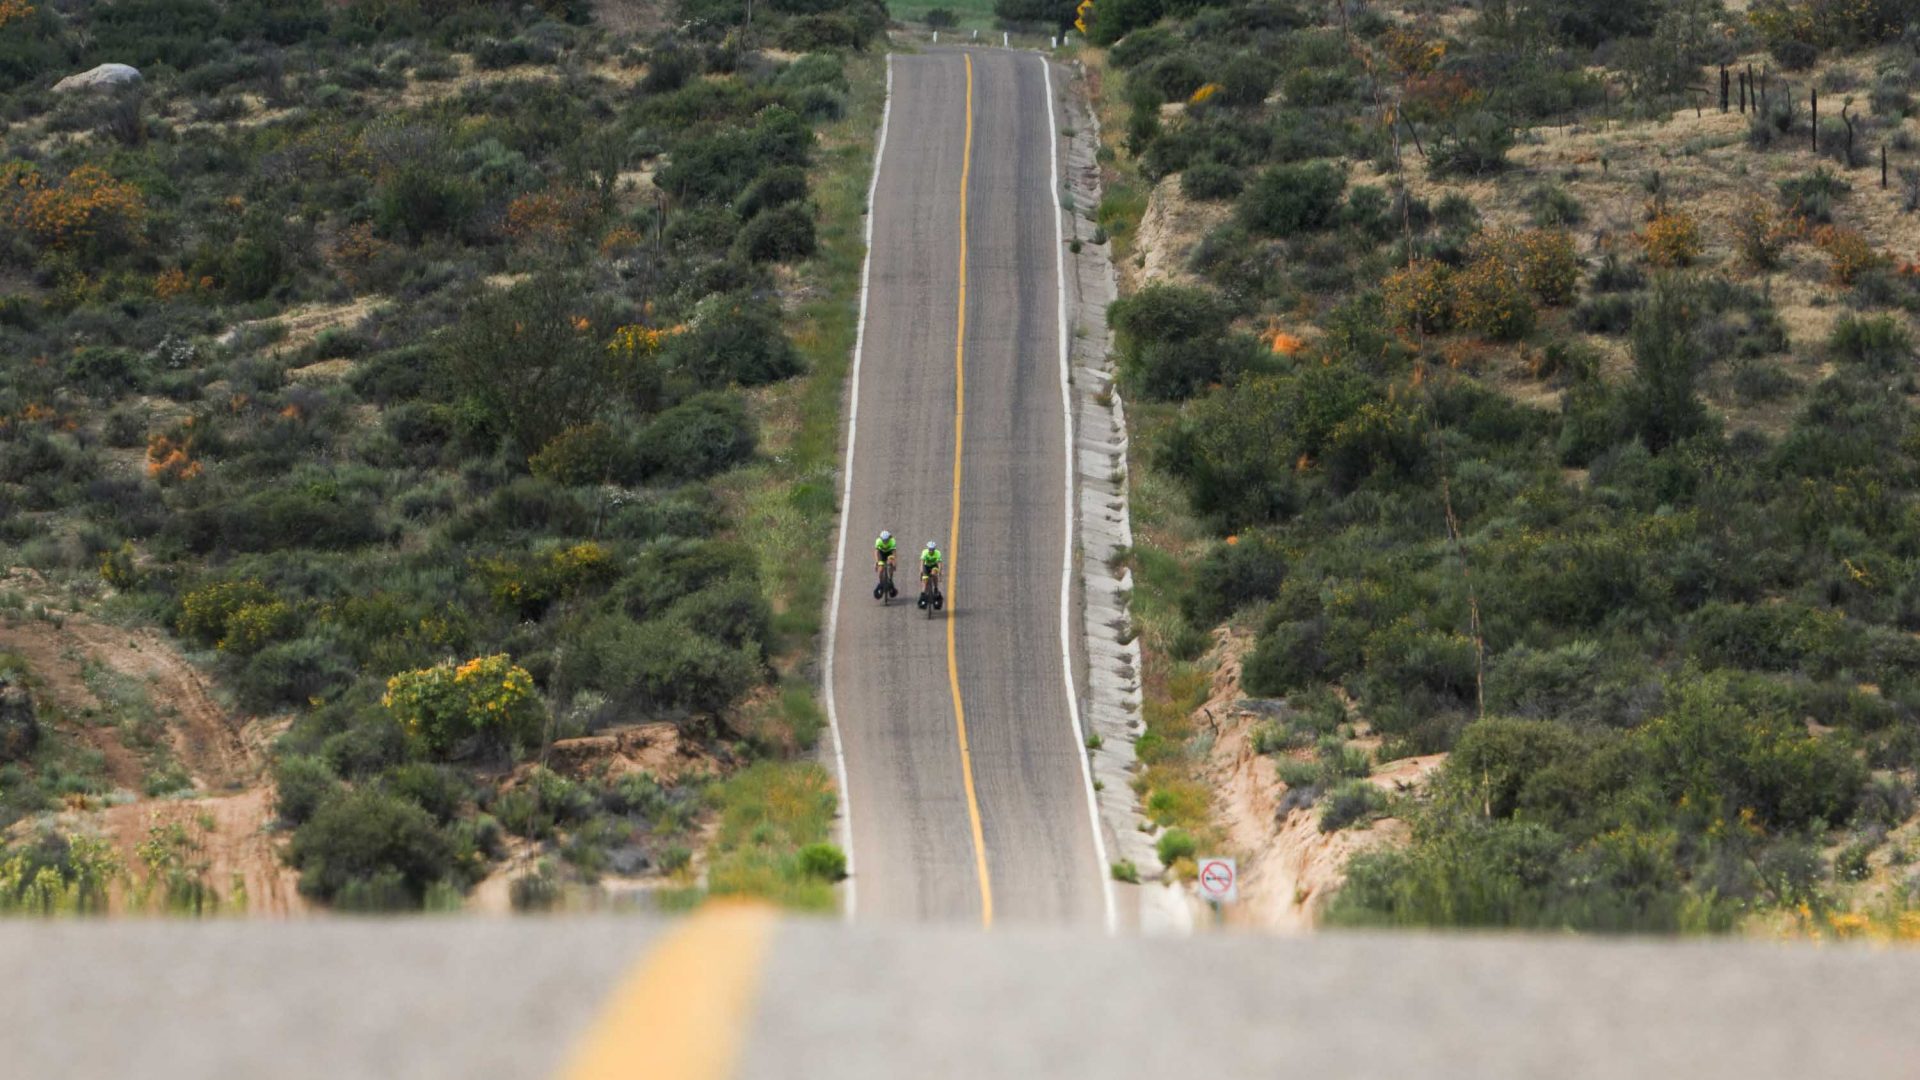 Two figures can be seen riding down a very steep tarmac road, with green shrubs on both side.